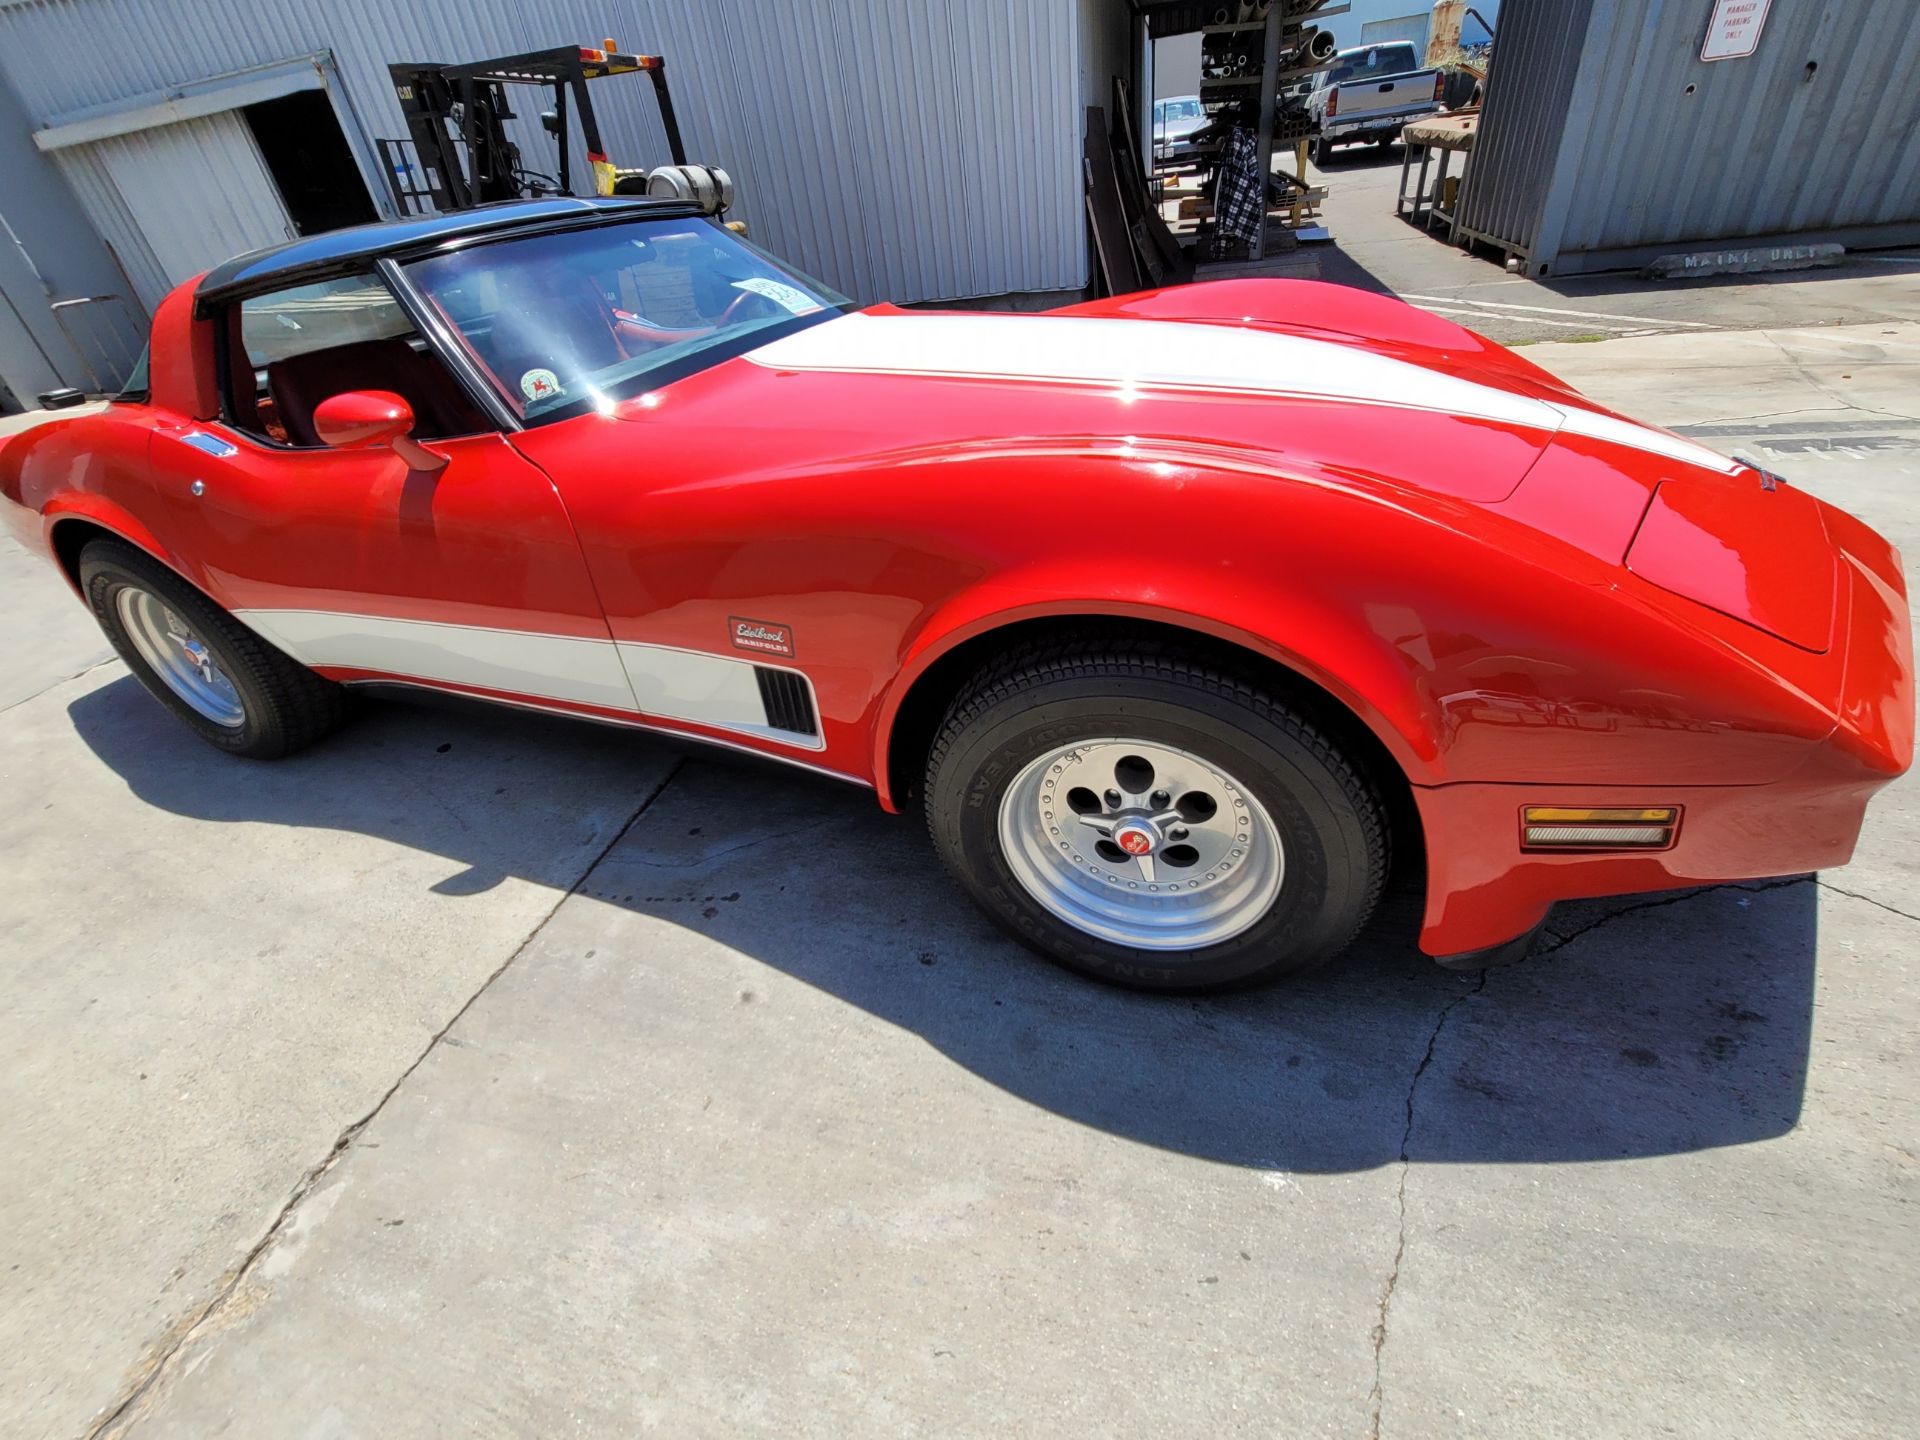 1980 CHEVROLET CORVETTE, WAS VIC EDELBROCK'S PERSONAL CAR BOUGHT FOR R&D, RED INTERIOR, TITLE ONLY. - Image 61 of 70